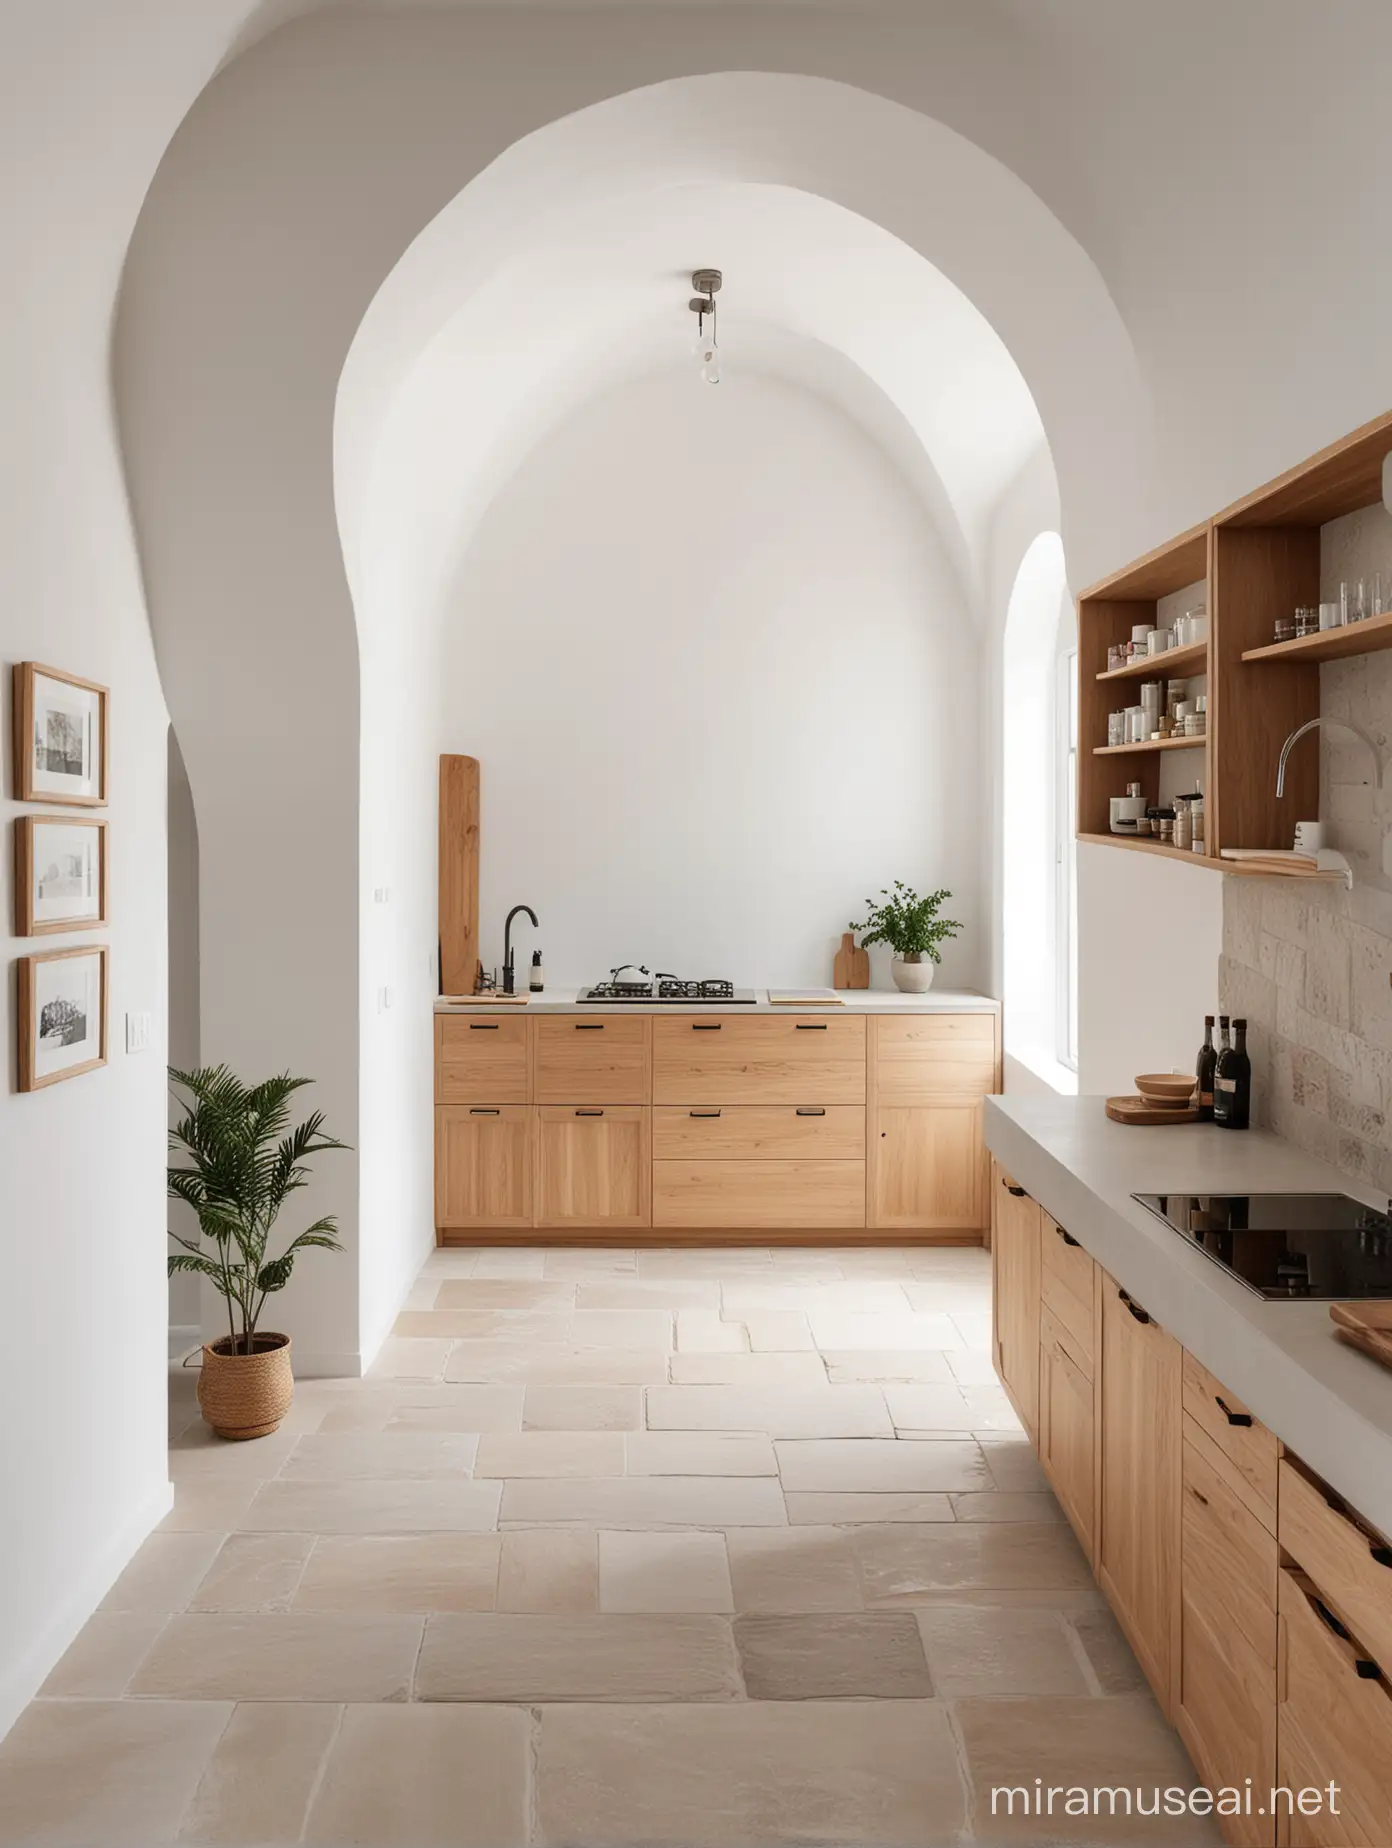 Minimalist Kitchen Interior with Wooden Accents and Stone Floor